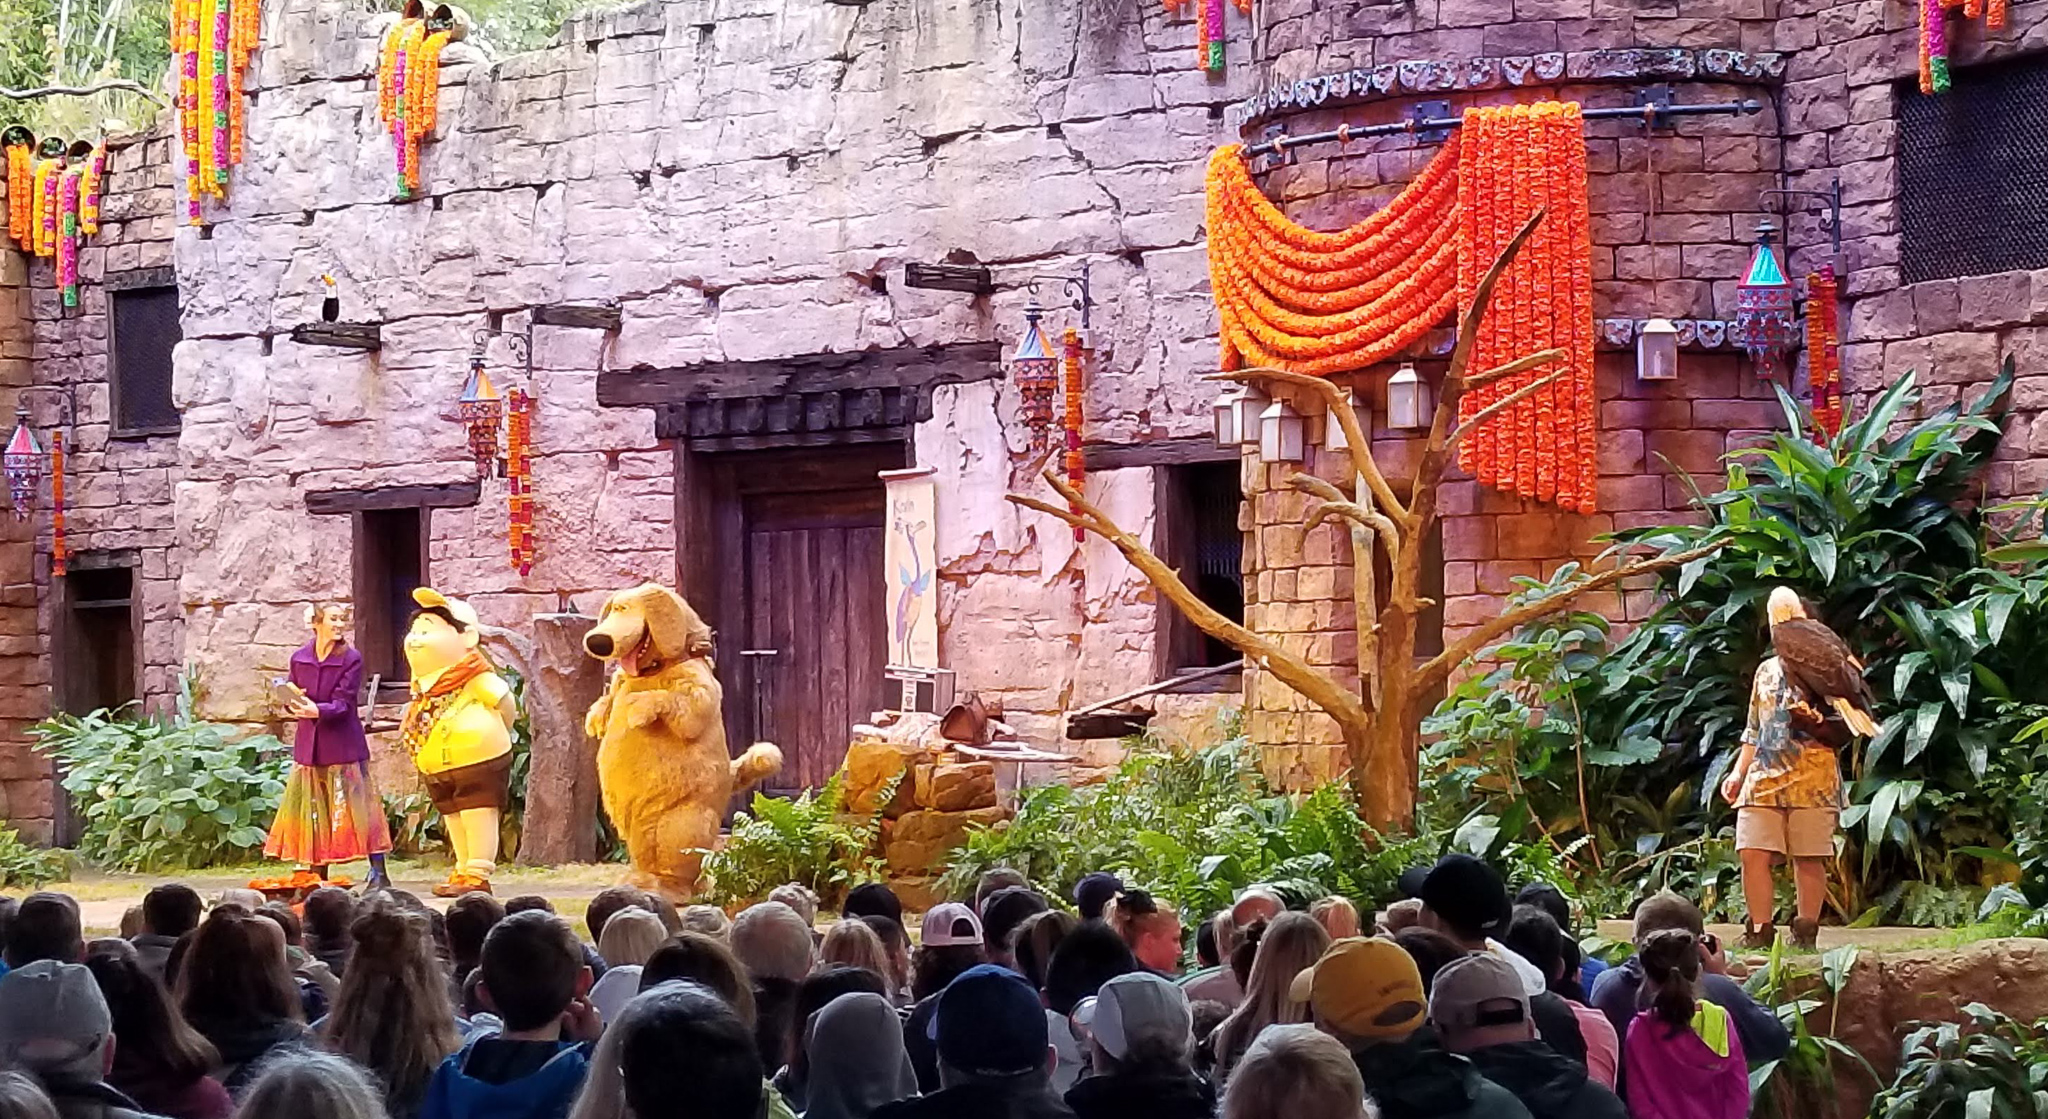 Cast performing Up! A Great Bird Adventure show in Animal Kingdom